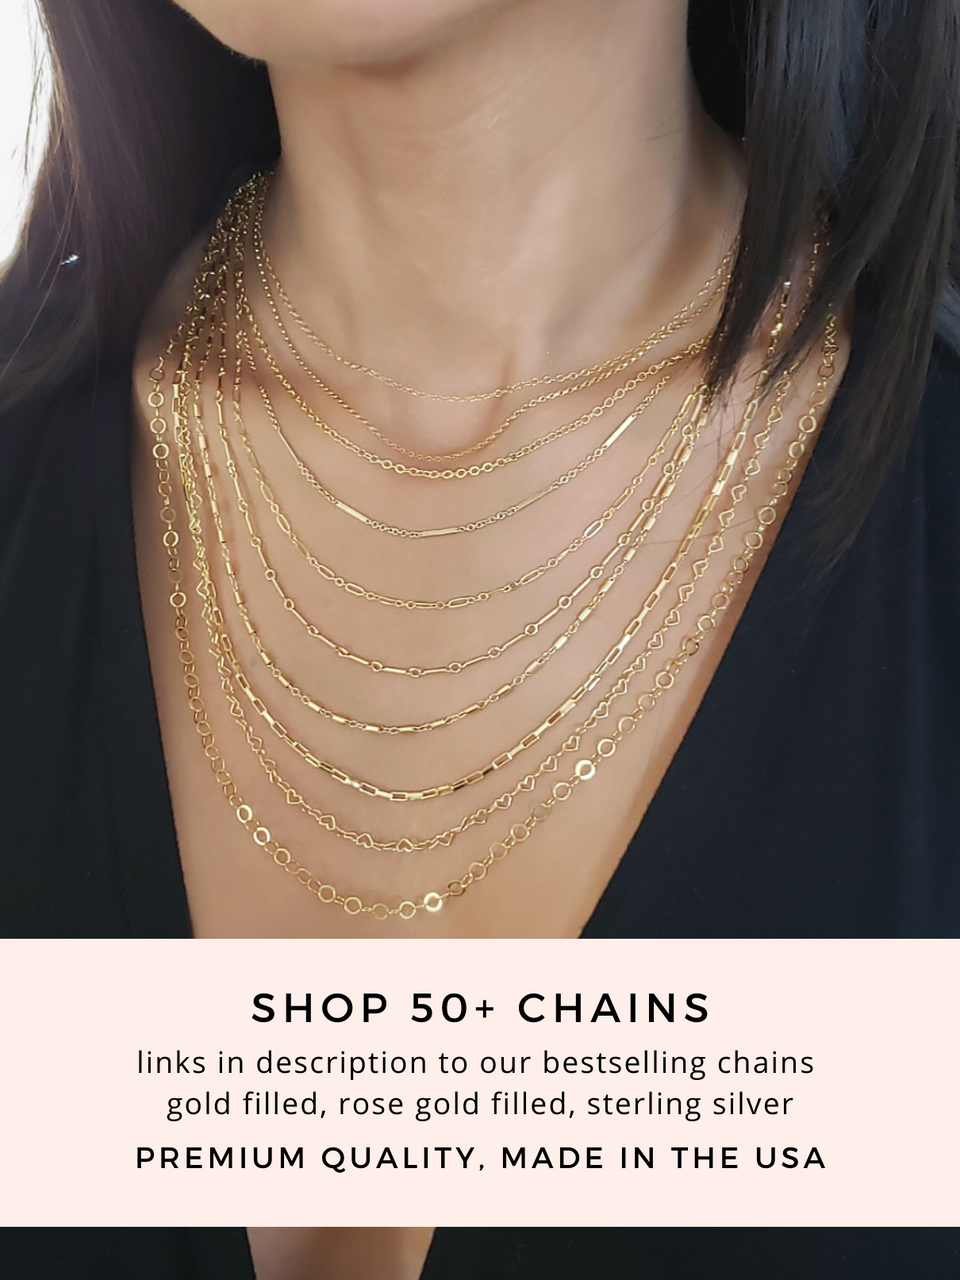 Necklace Chains and Chain Jewelry